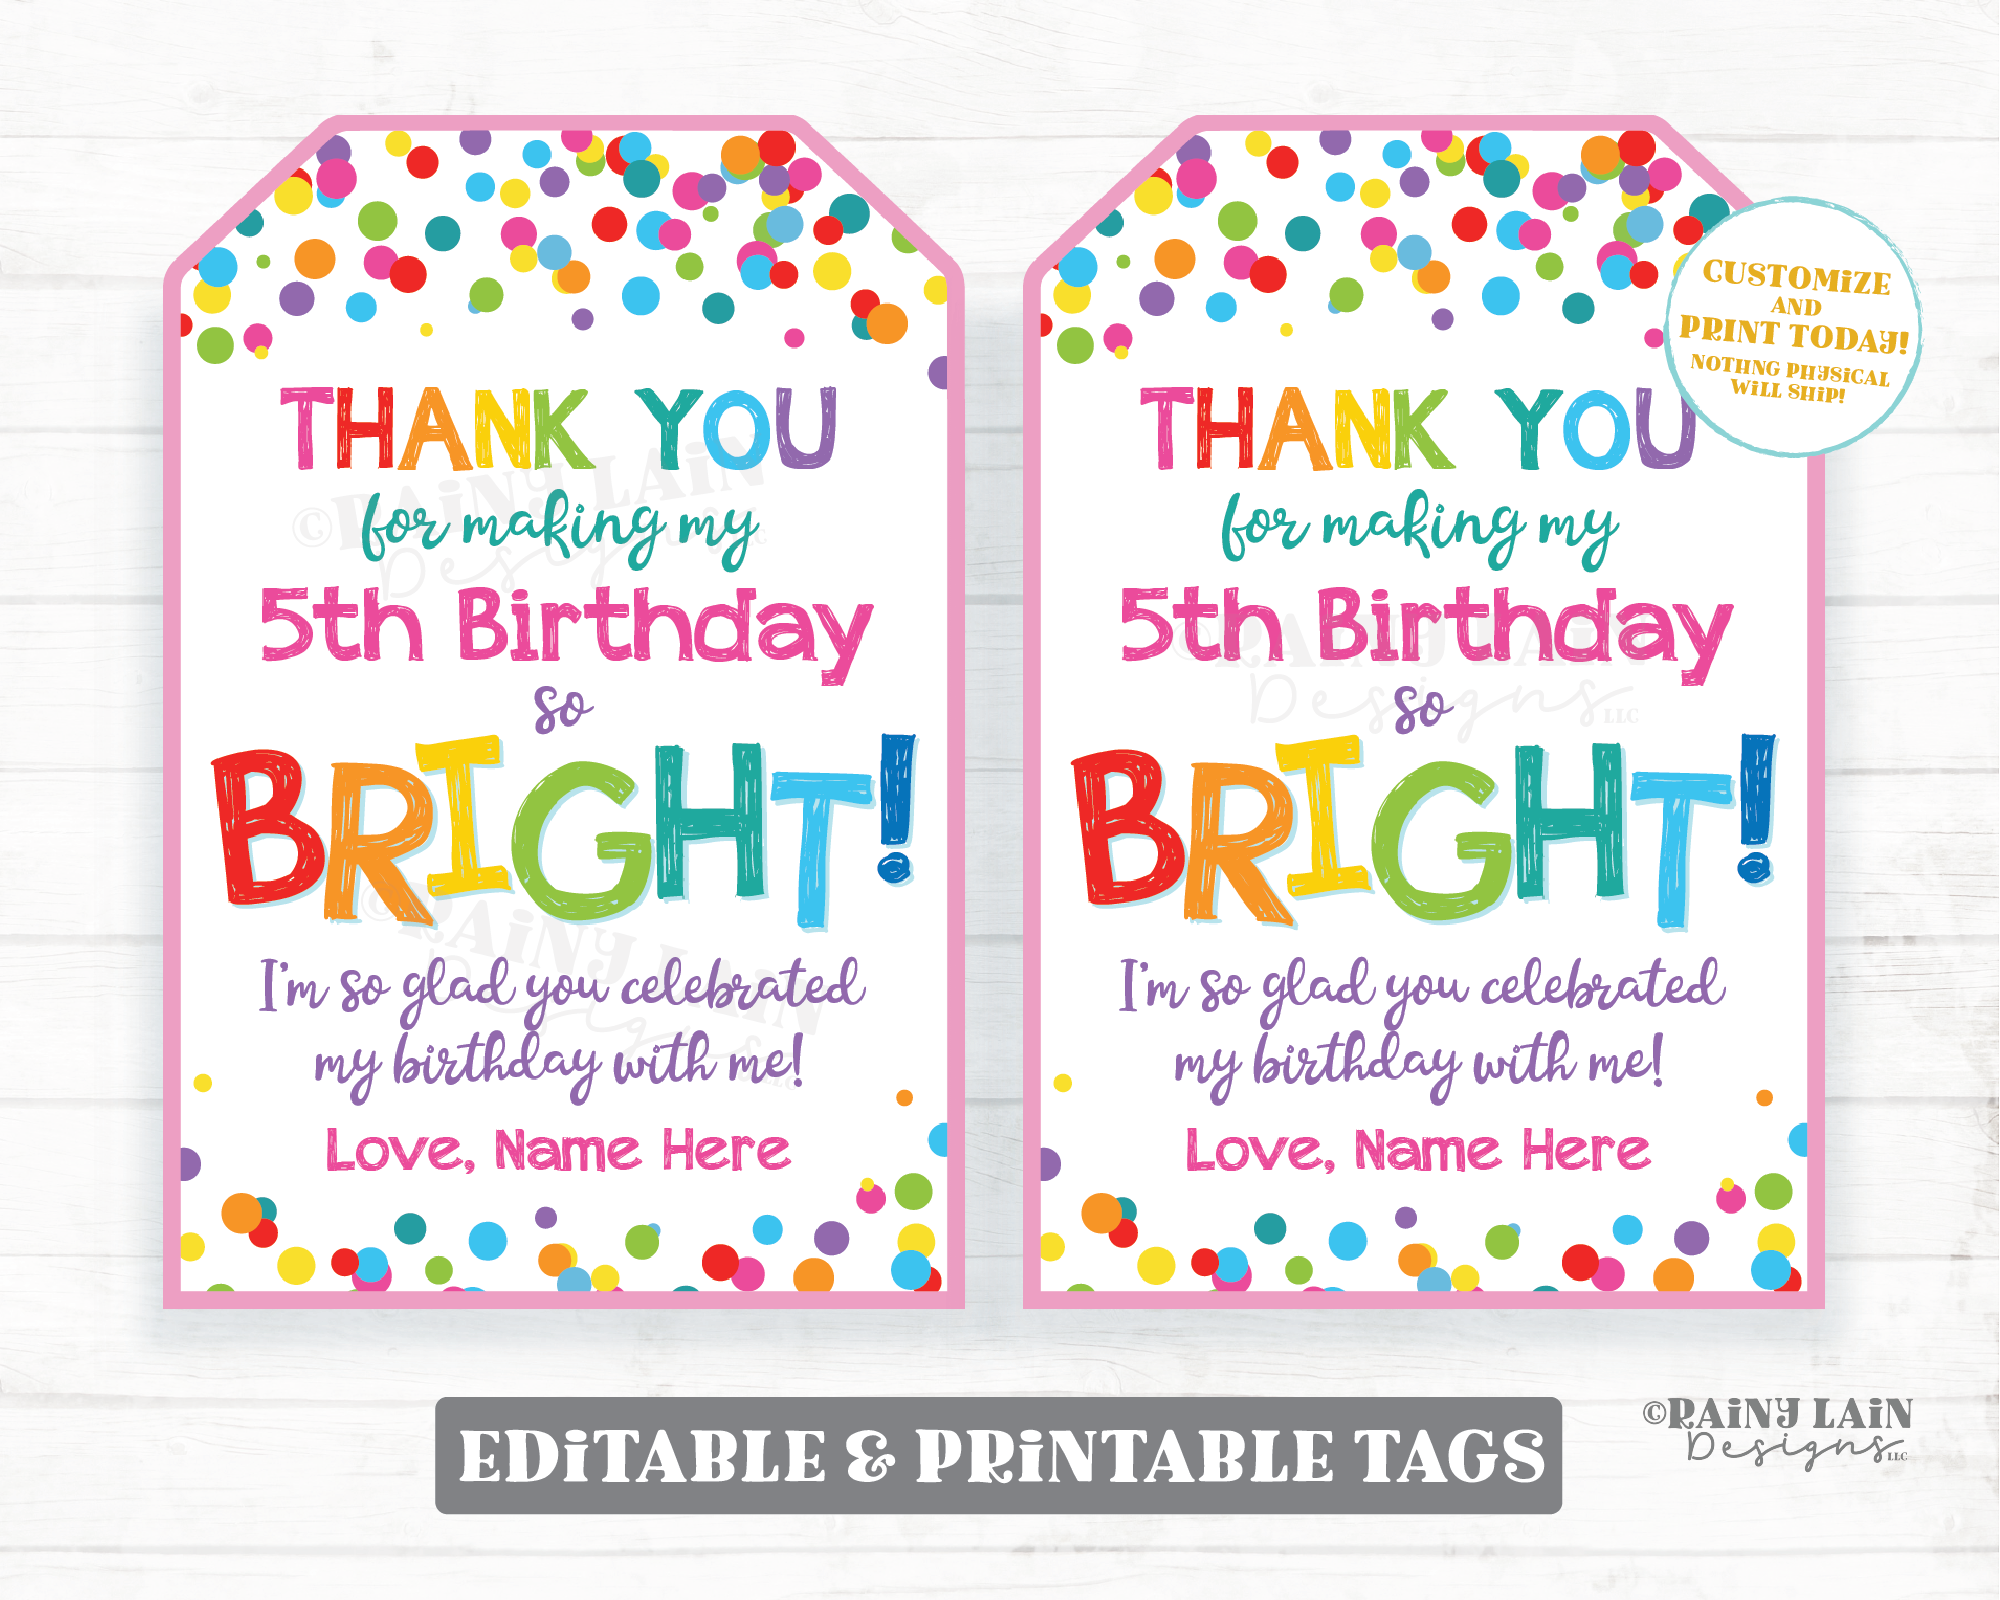 Thanks for Making My Birthday Bright Tag Sunglasses Glow Stick Finger Light Sun Summer Bright Brighten Birthday Party Favor School Party